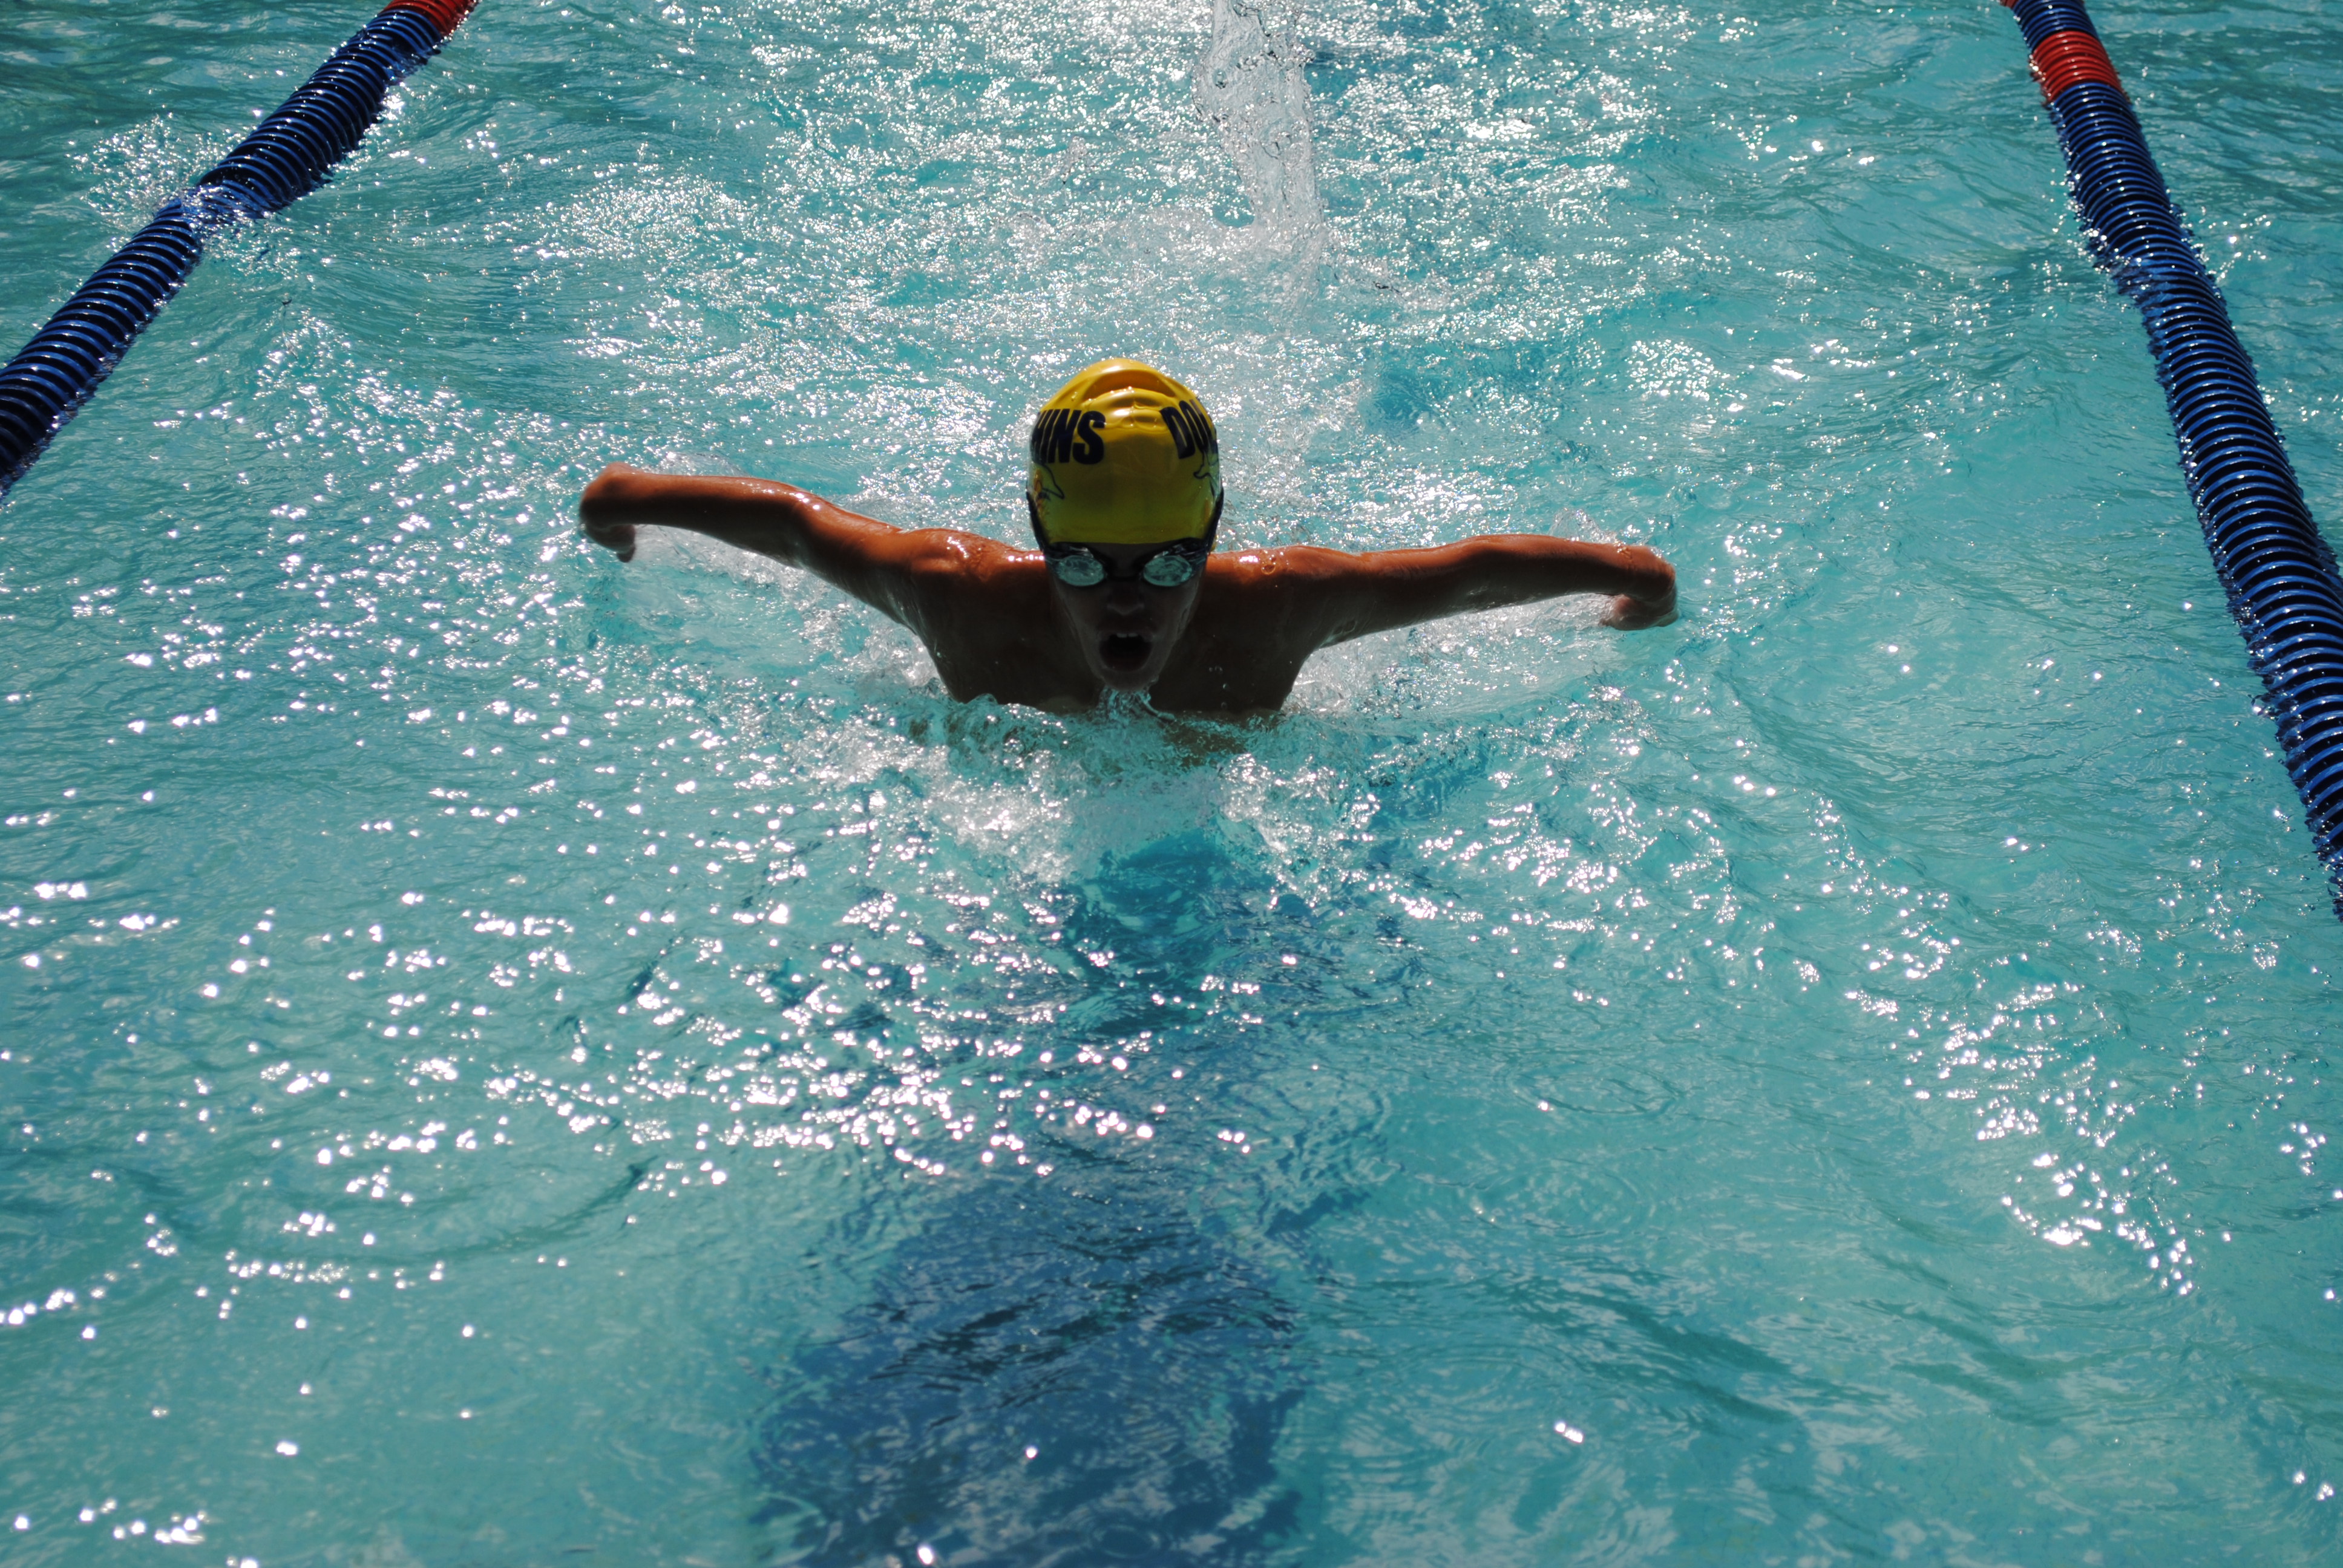 Matthew Mays competes in the butterfly swim